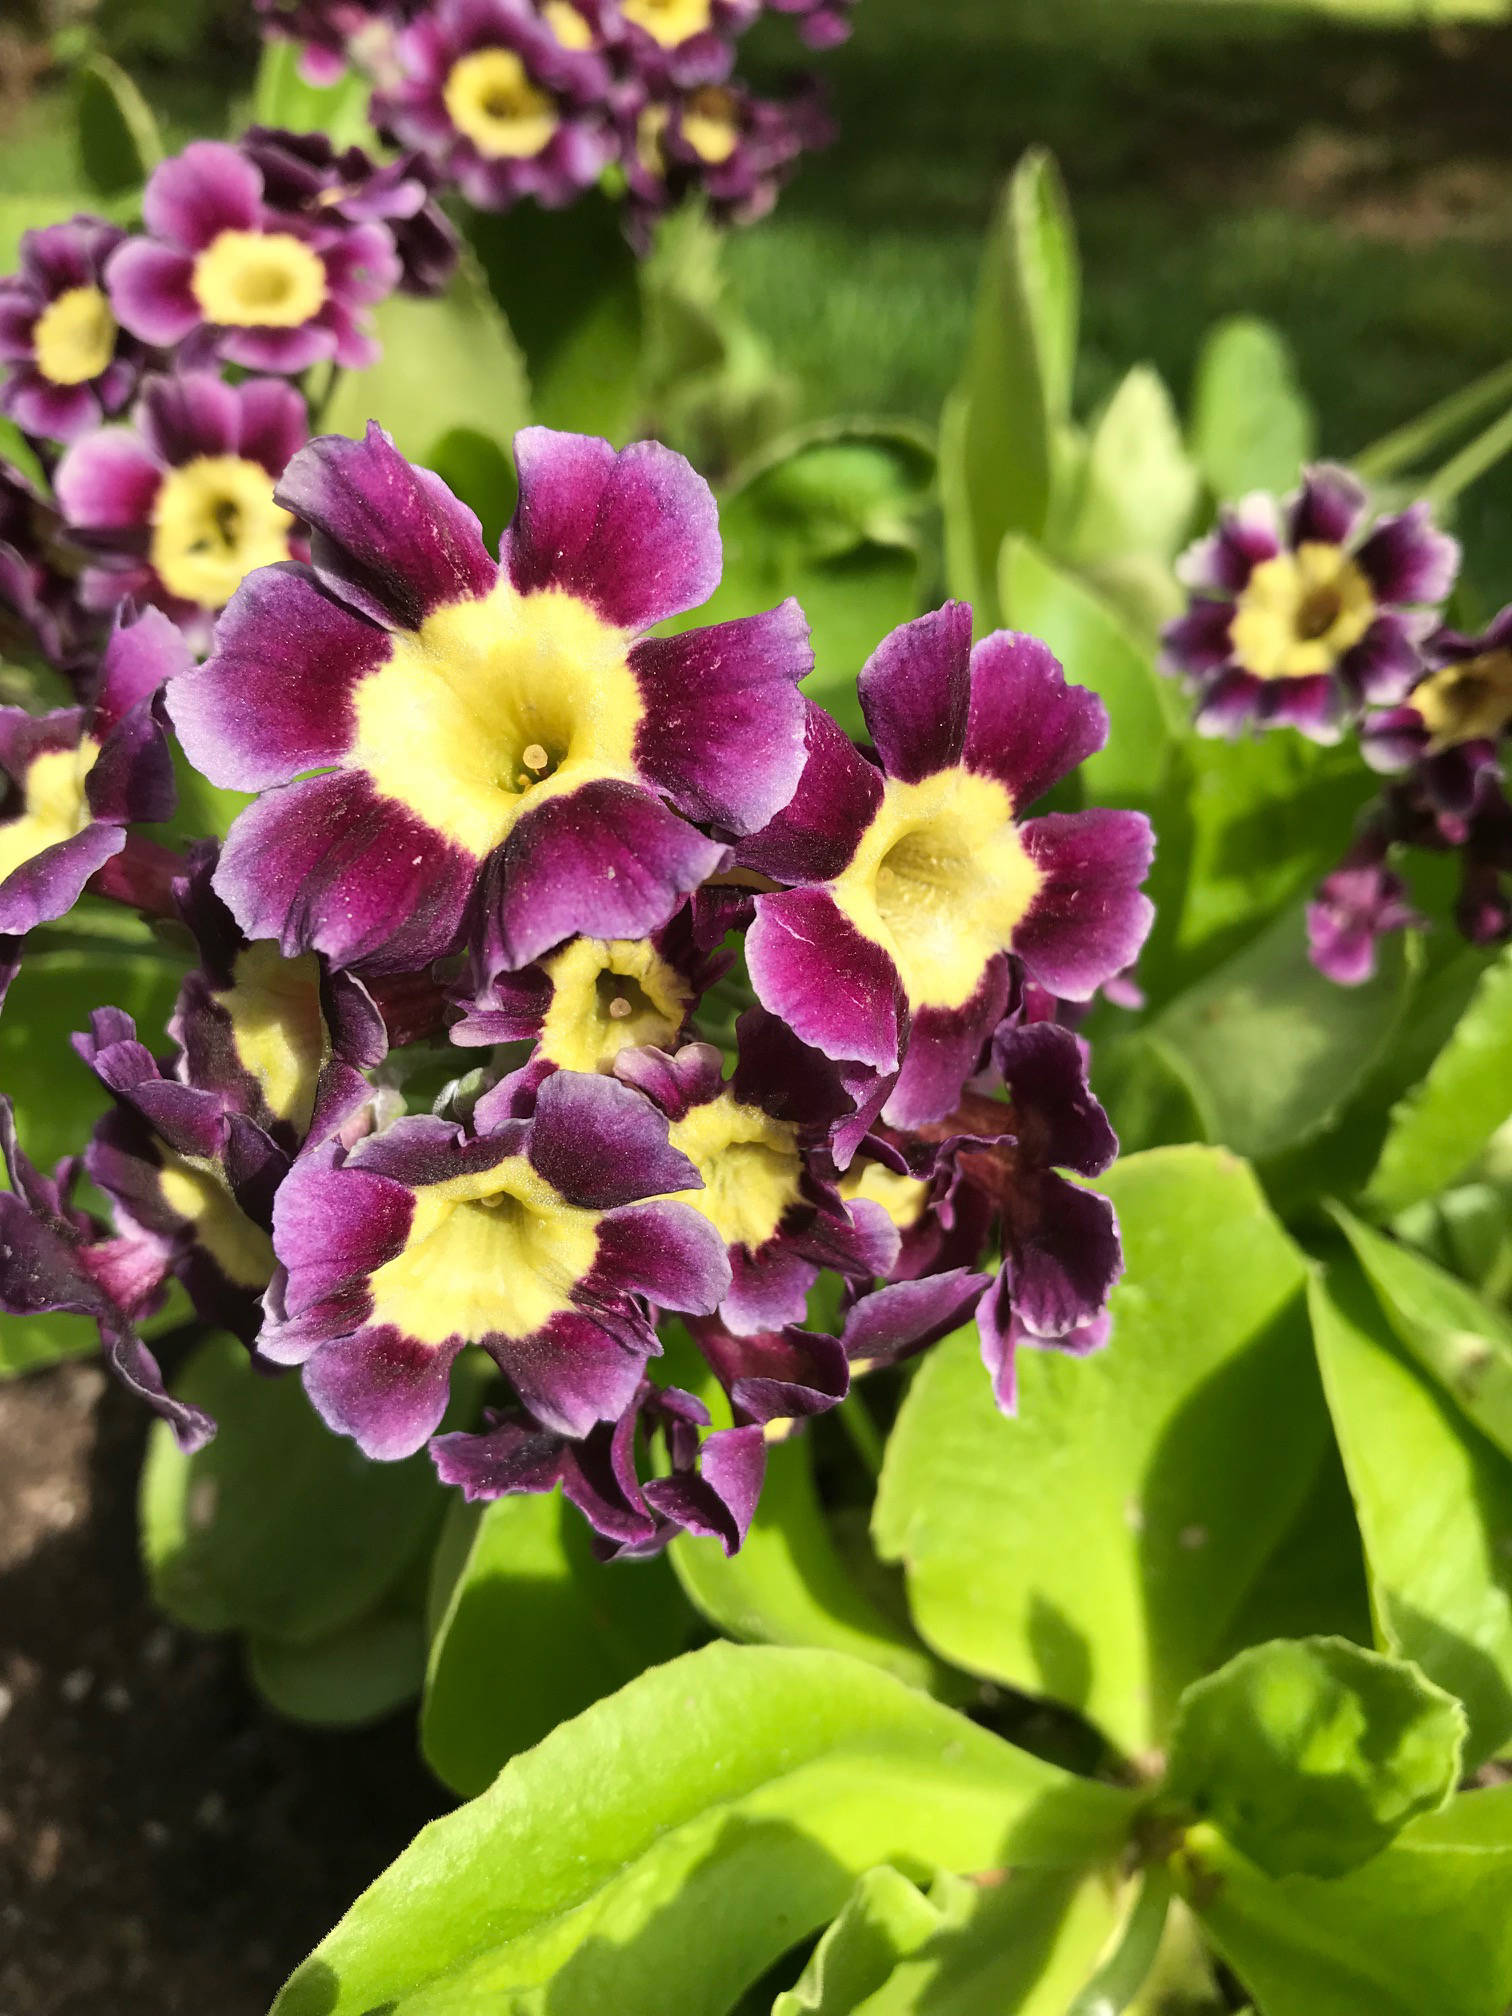 Primula auricula in all its plummy glory. (Photo by Rosemary Fitzpatrick)